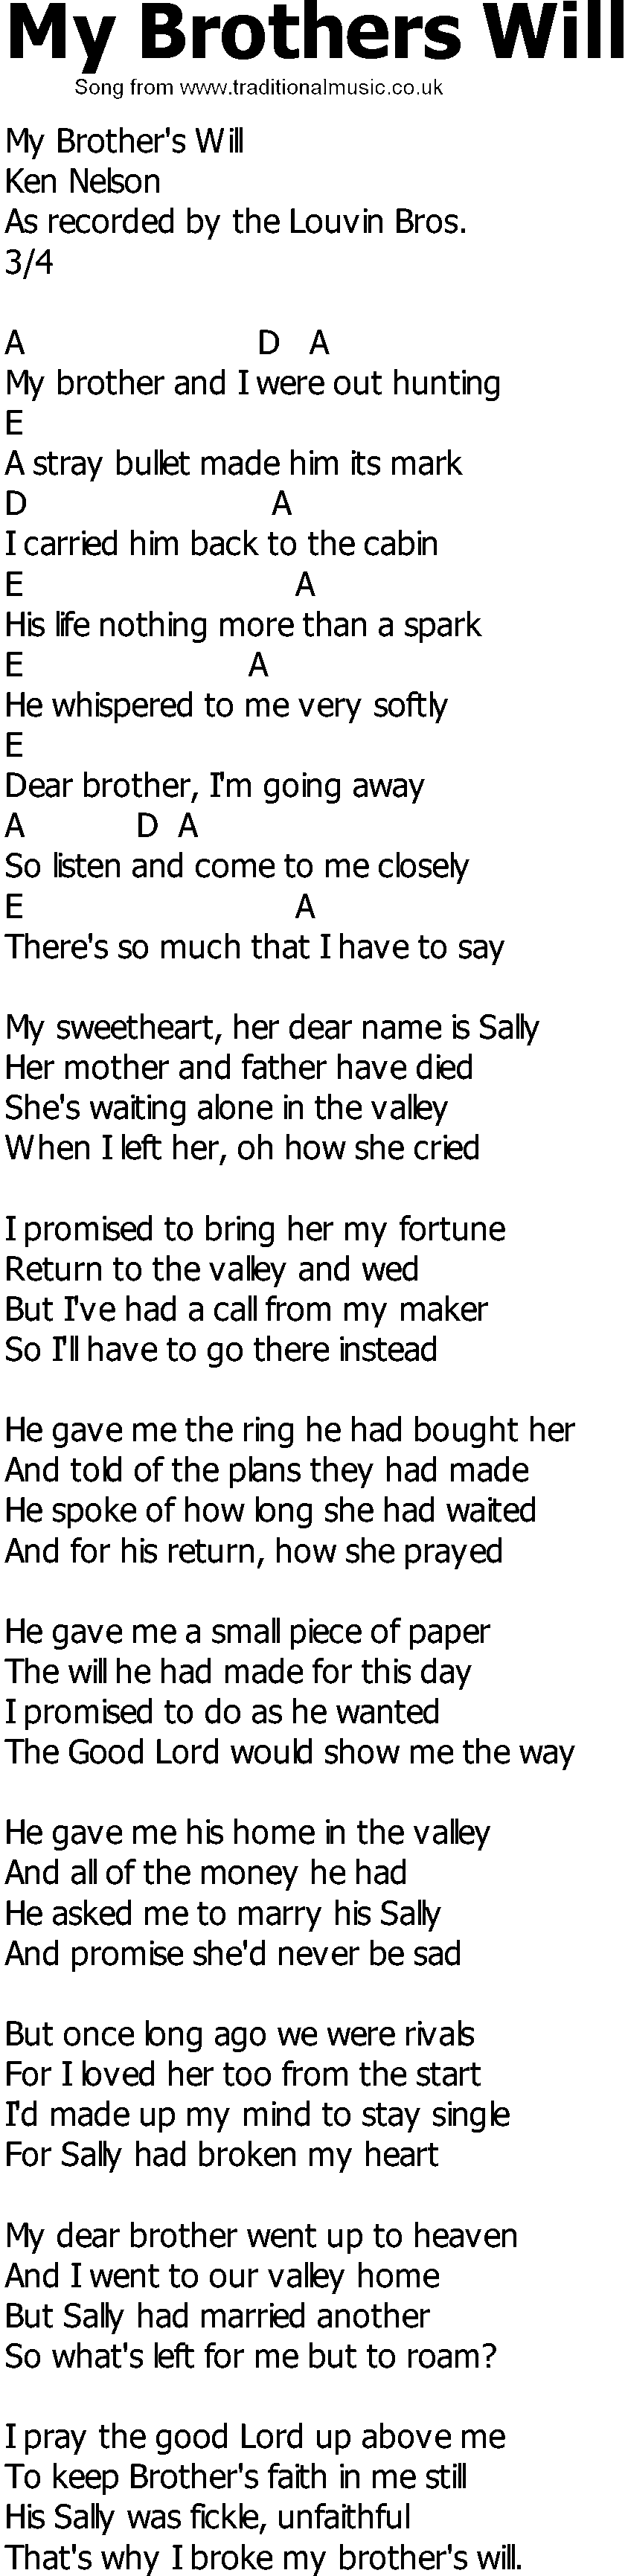 Old Country song lyrics with chords - My Brothers Will